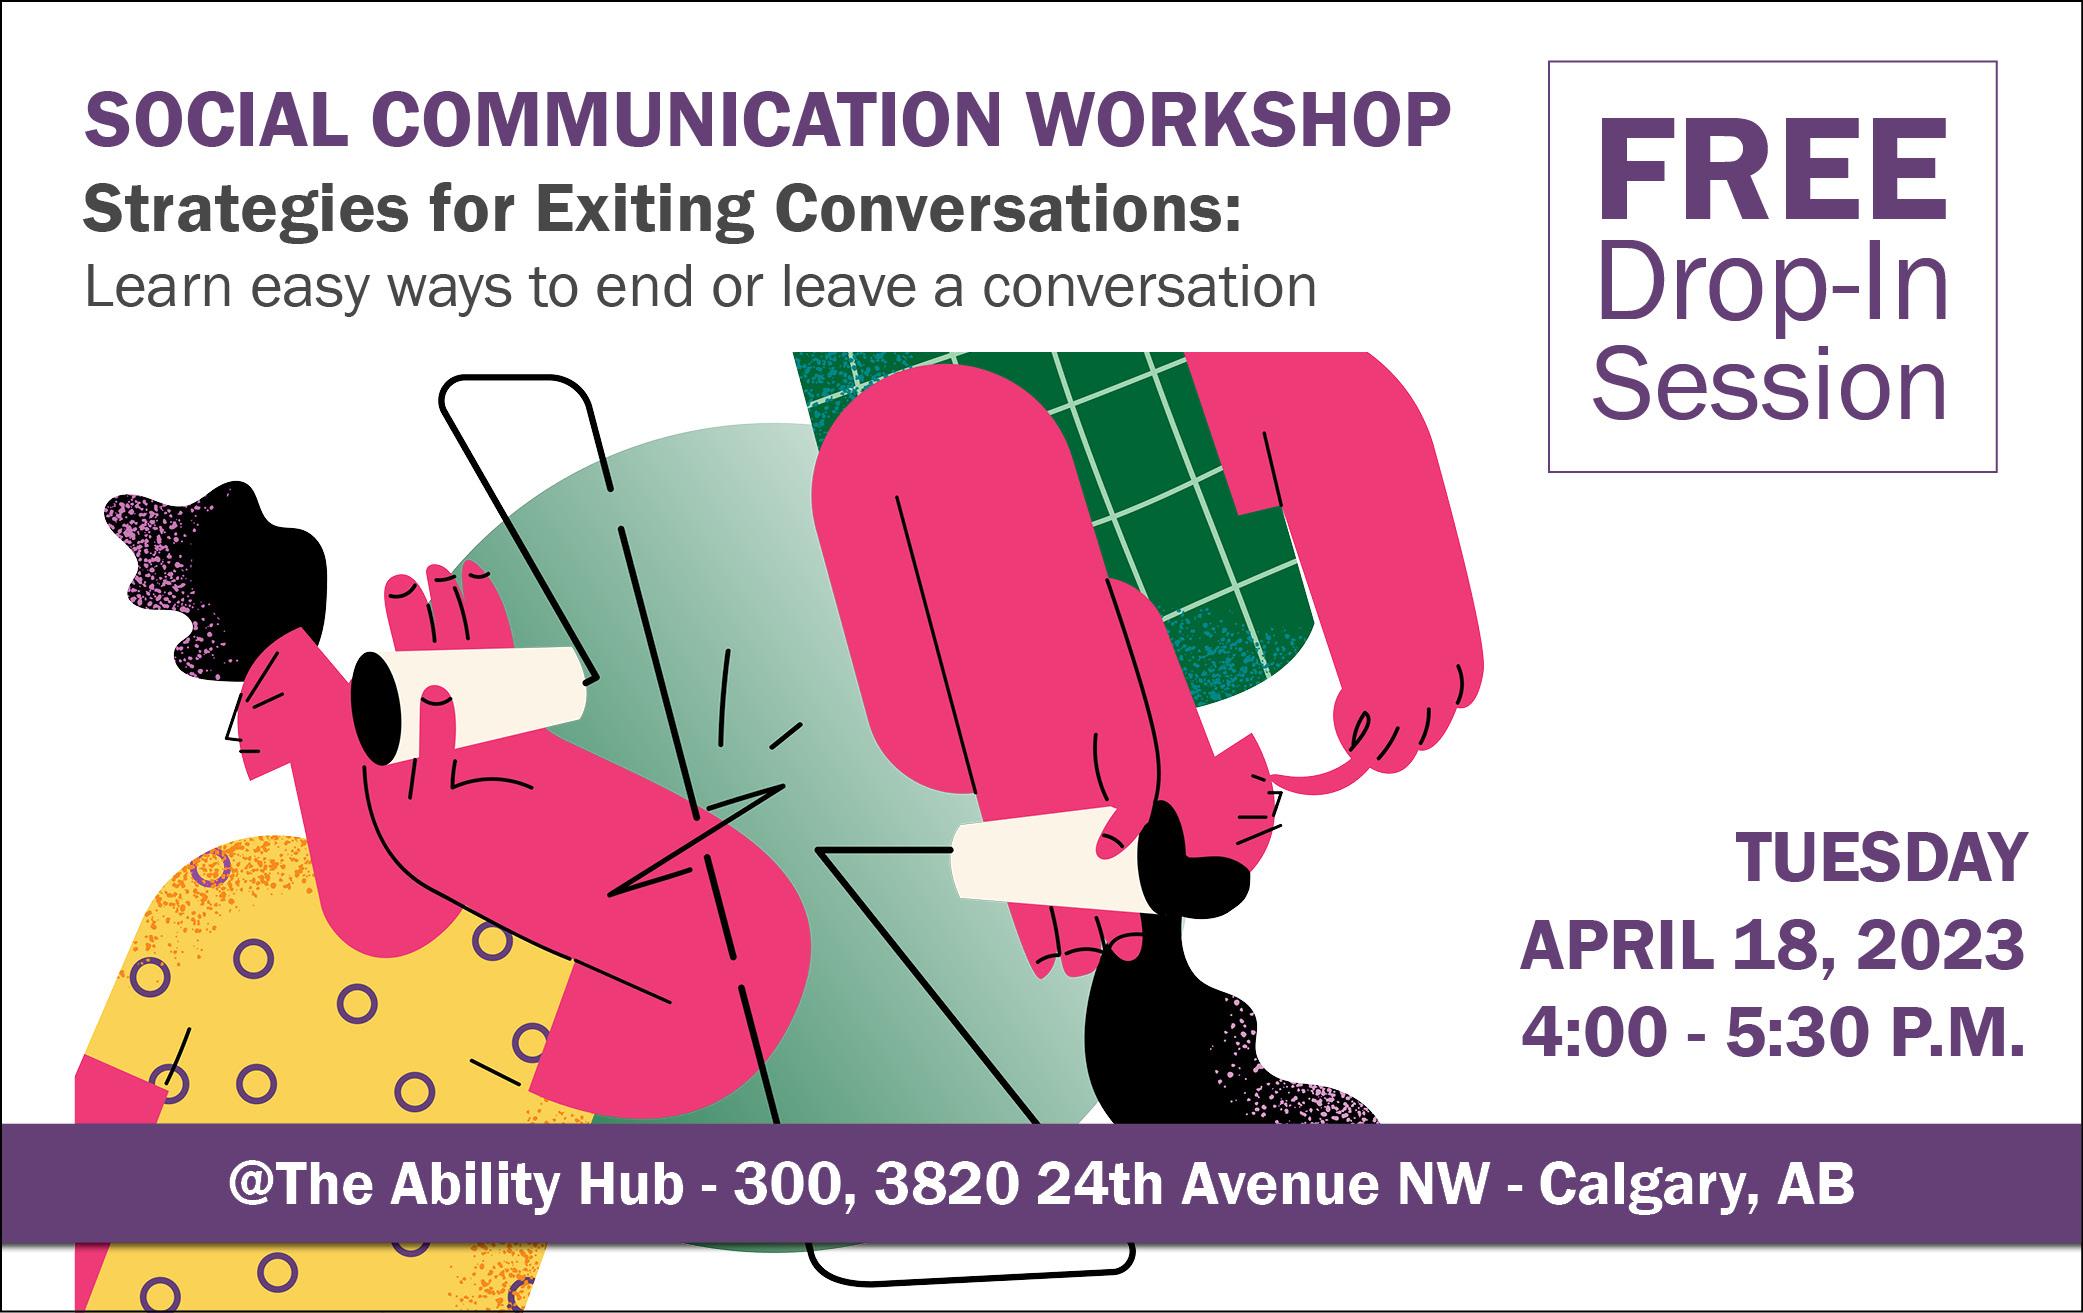 Social communication workshop, strategies for exiting conversations